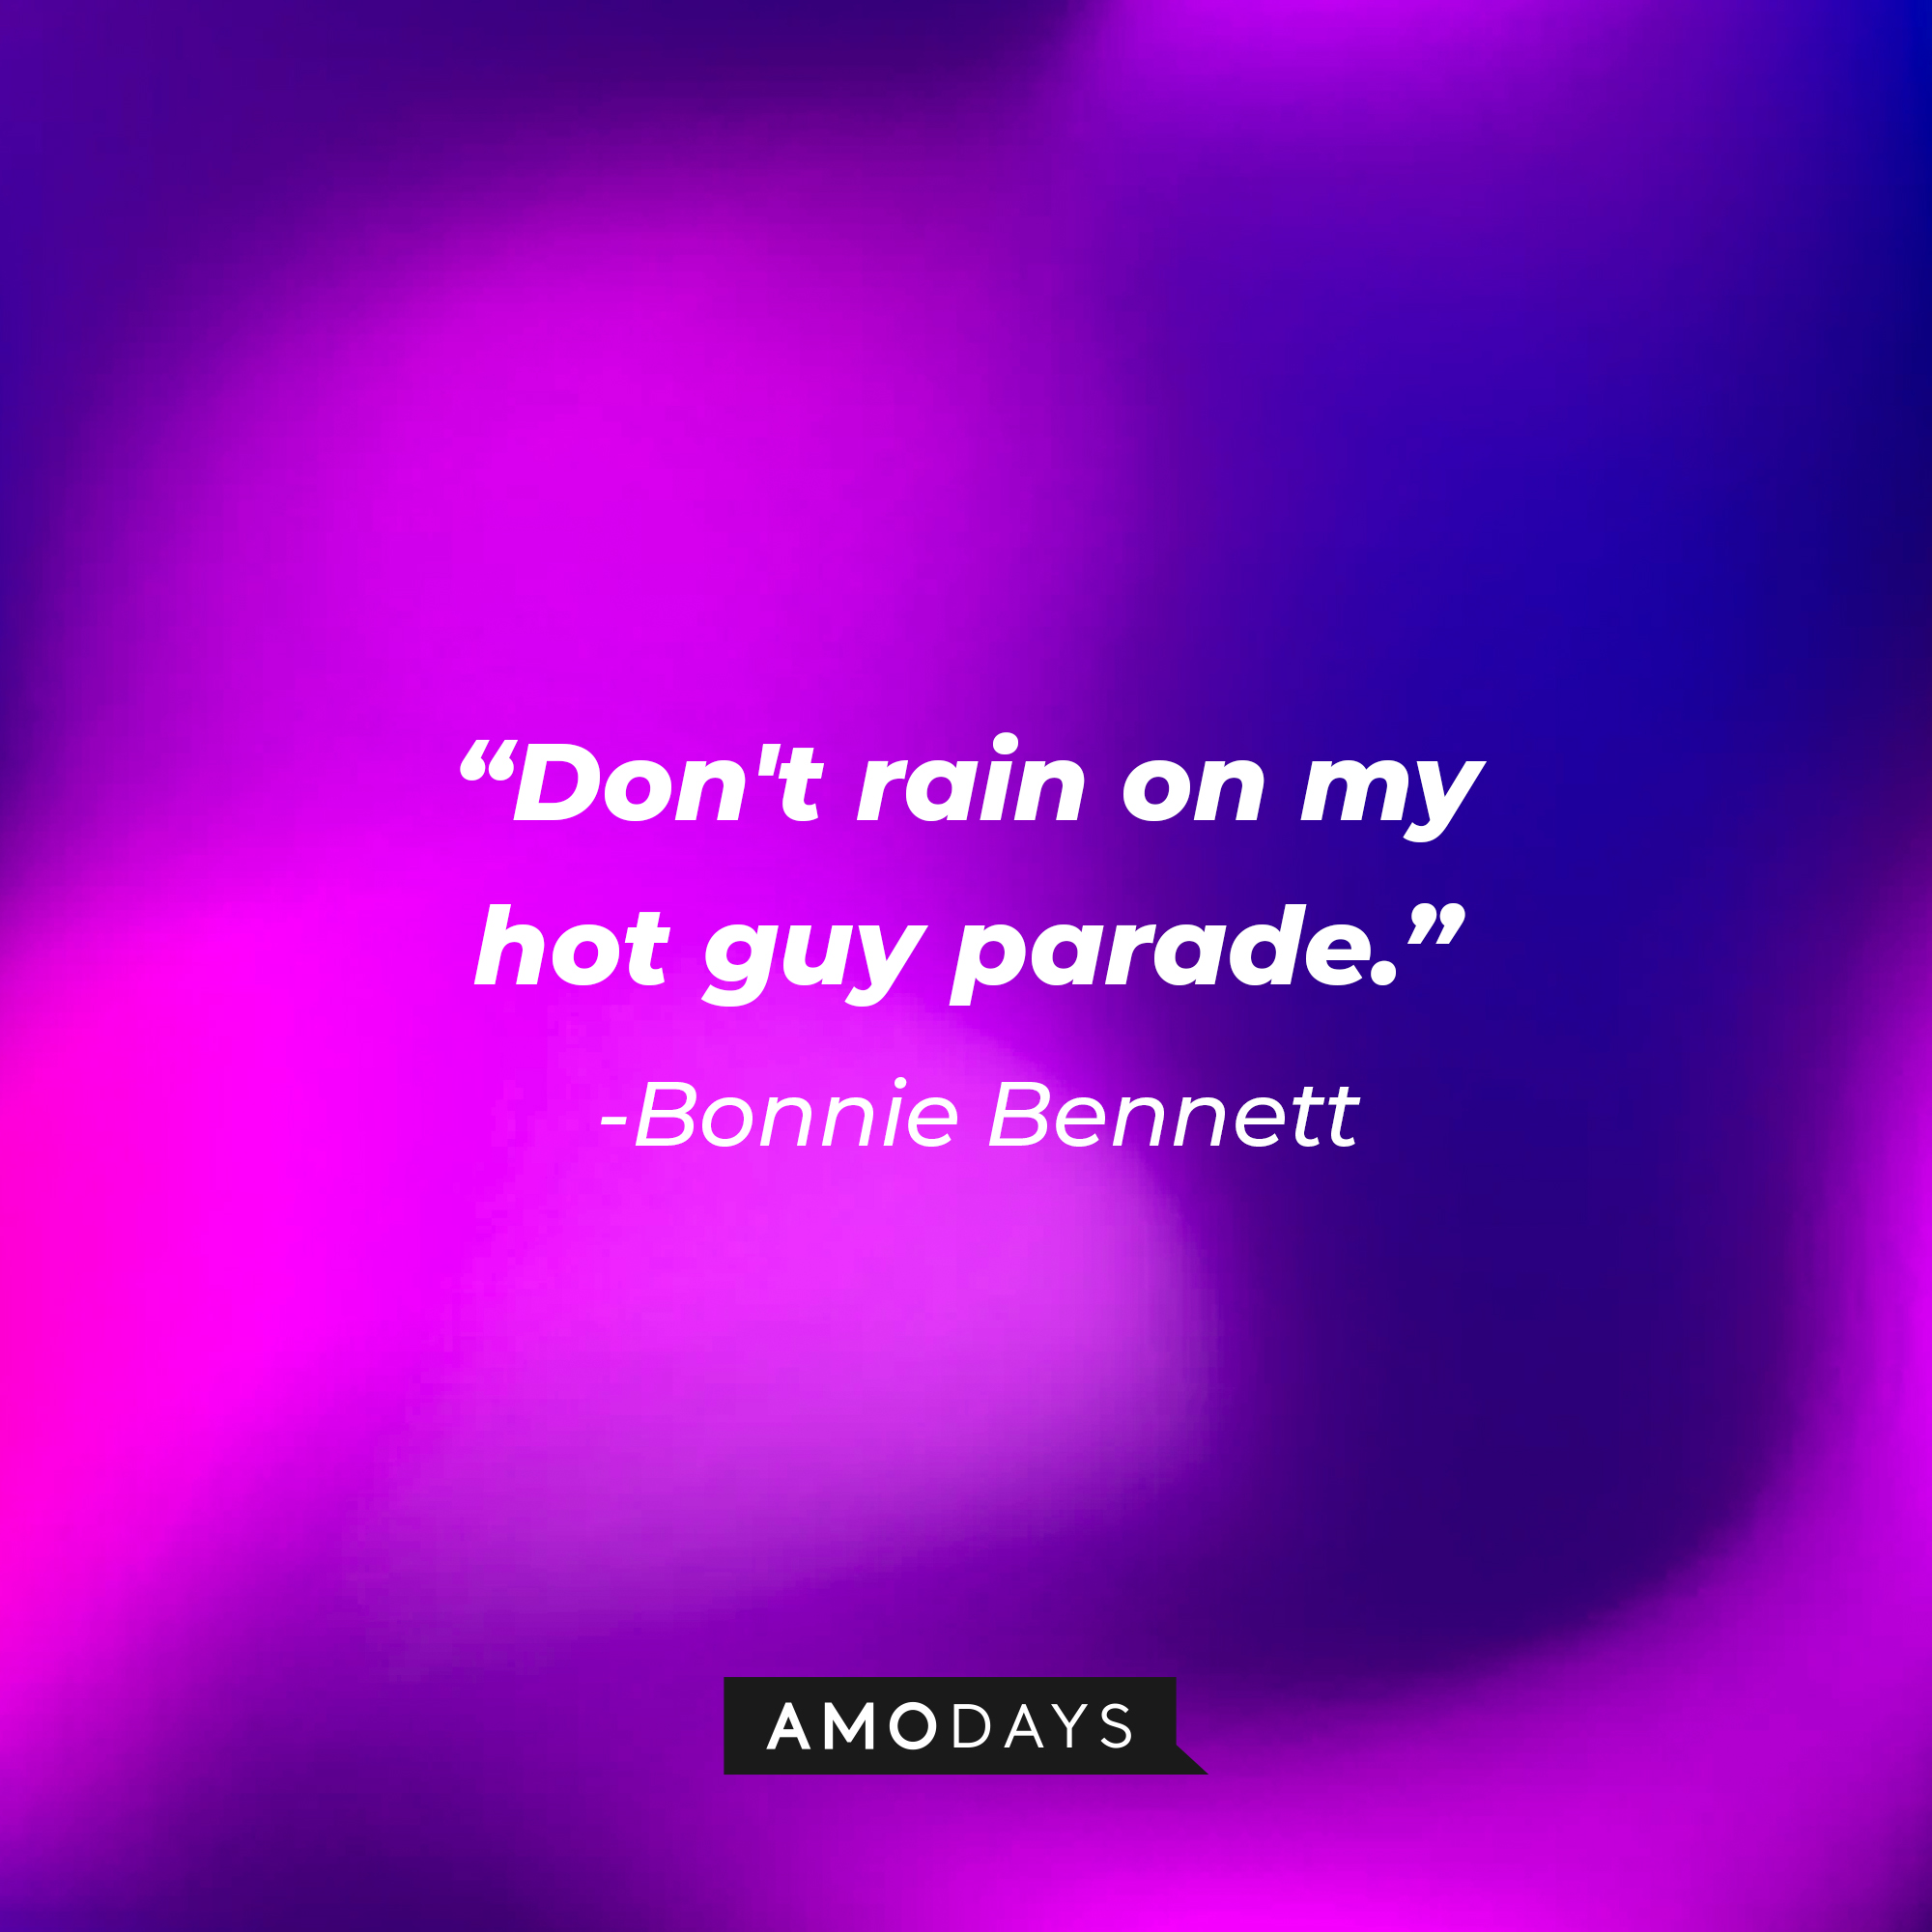 Bonnie Bennett’s quote: “Don't rain on my hot guy parade.” | Source: AmoDays